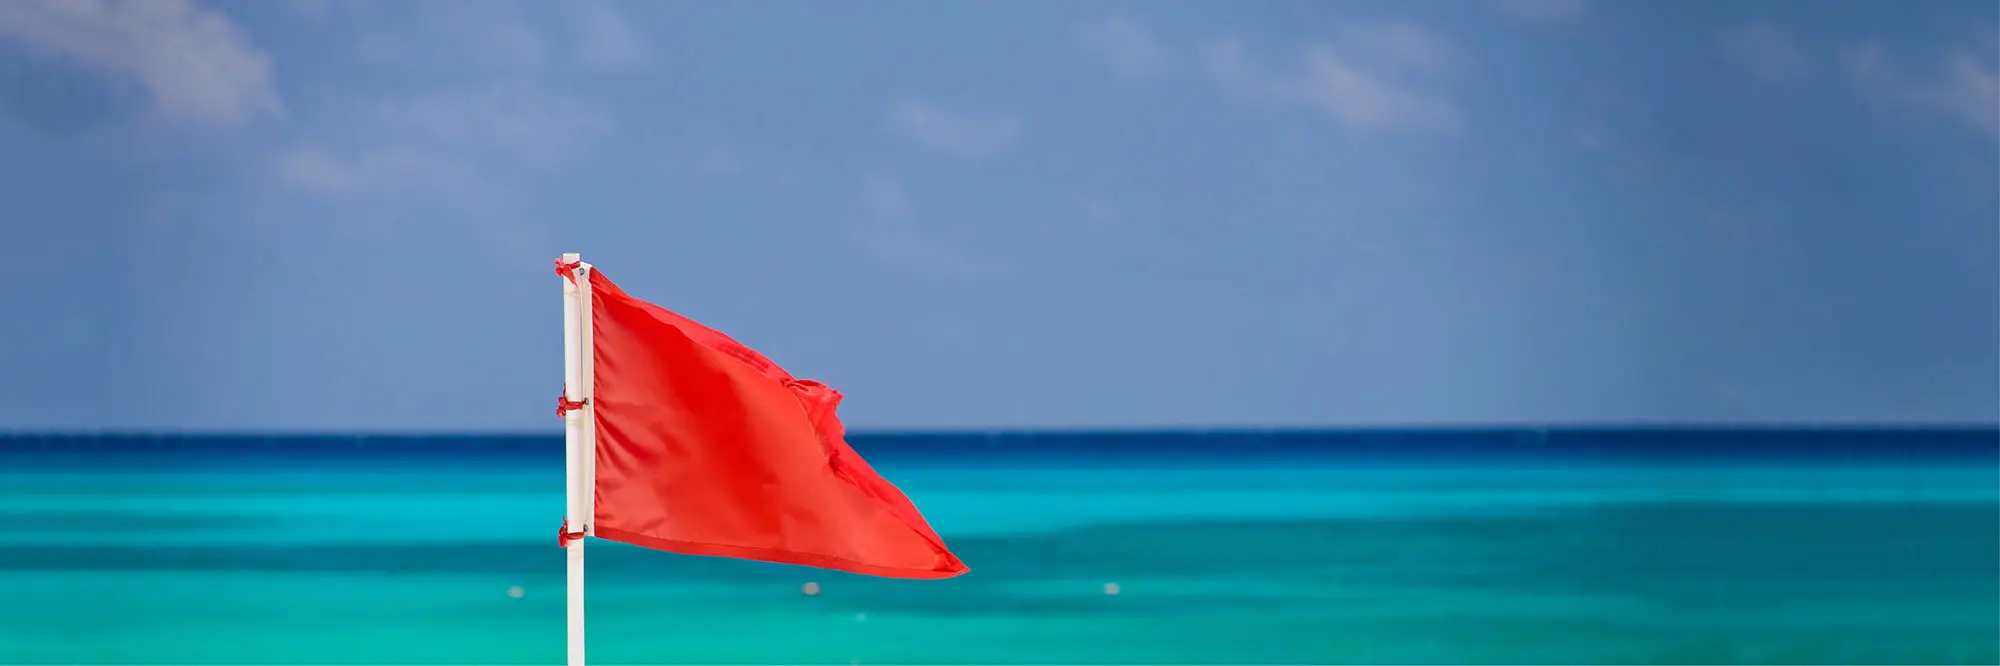 red flag flying at the beach